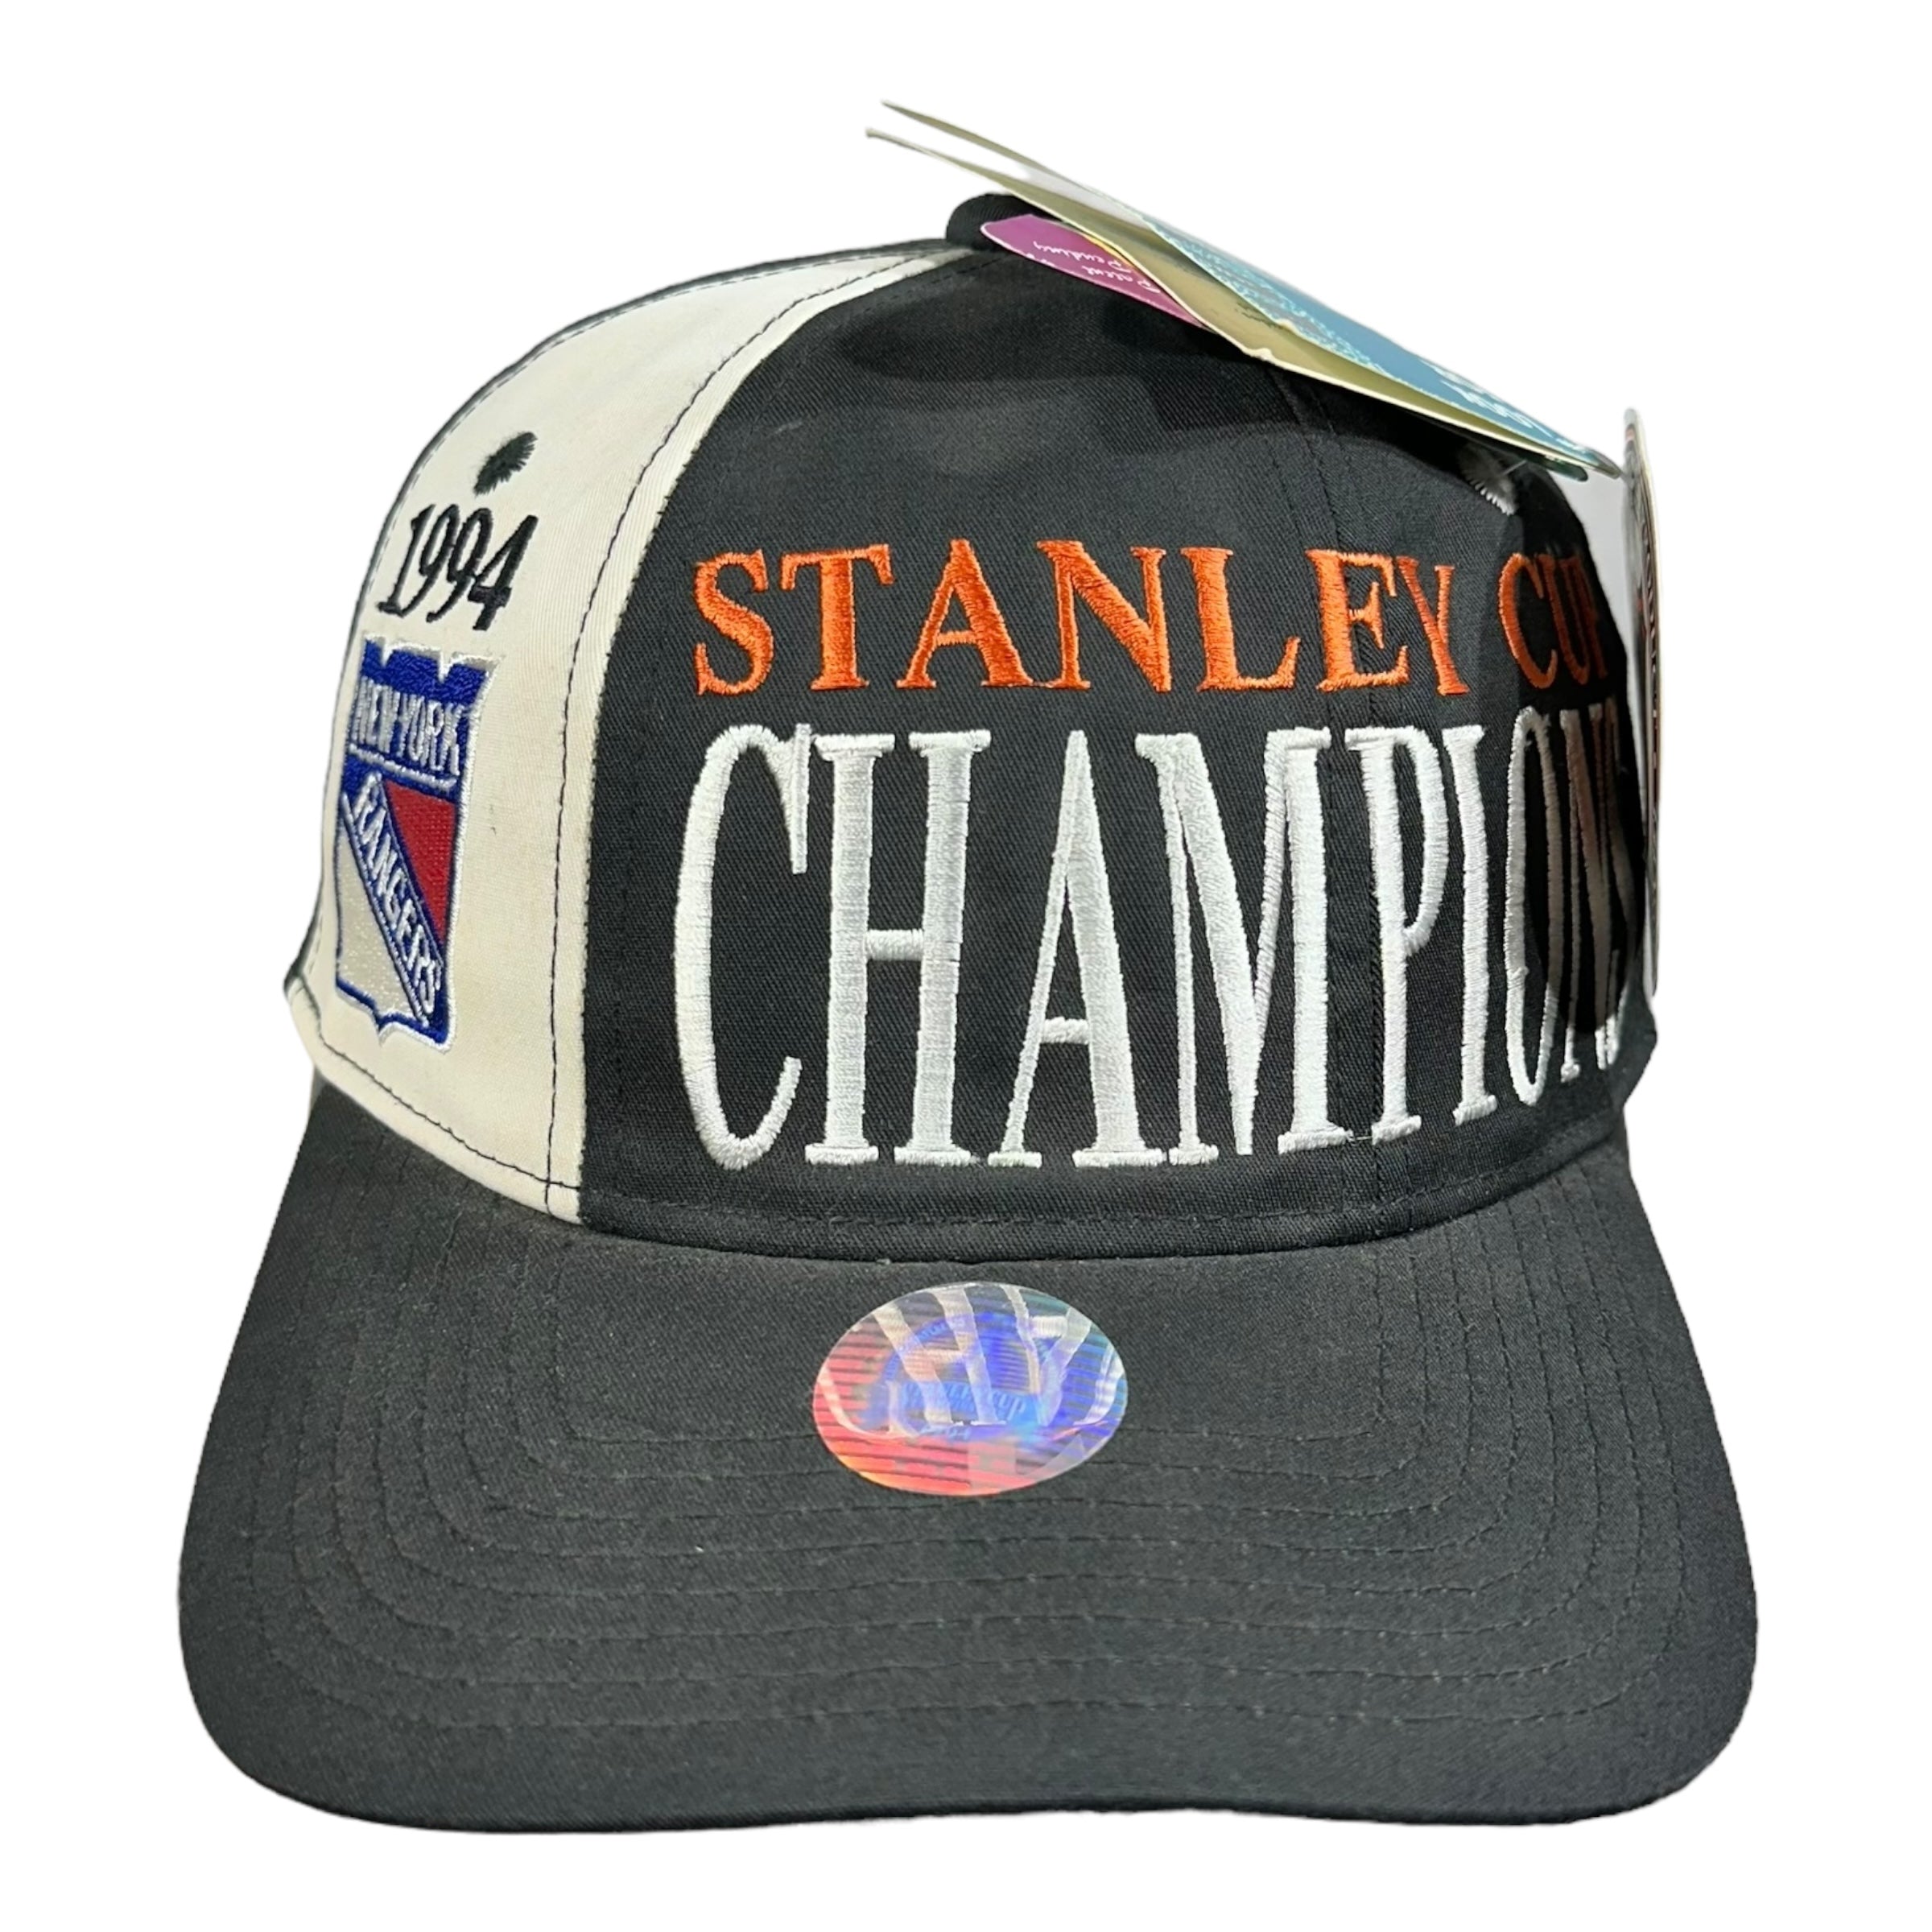 Vintage NWT New York Rangers Stanley Cup Champions Snapback Hat 1994